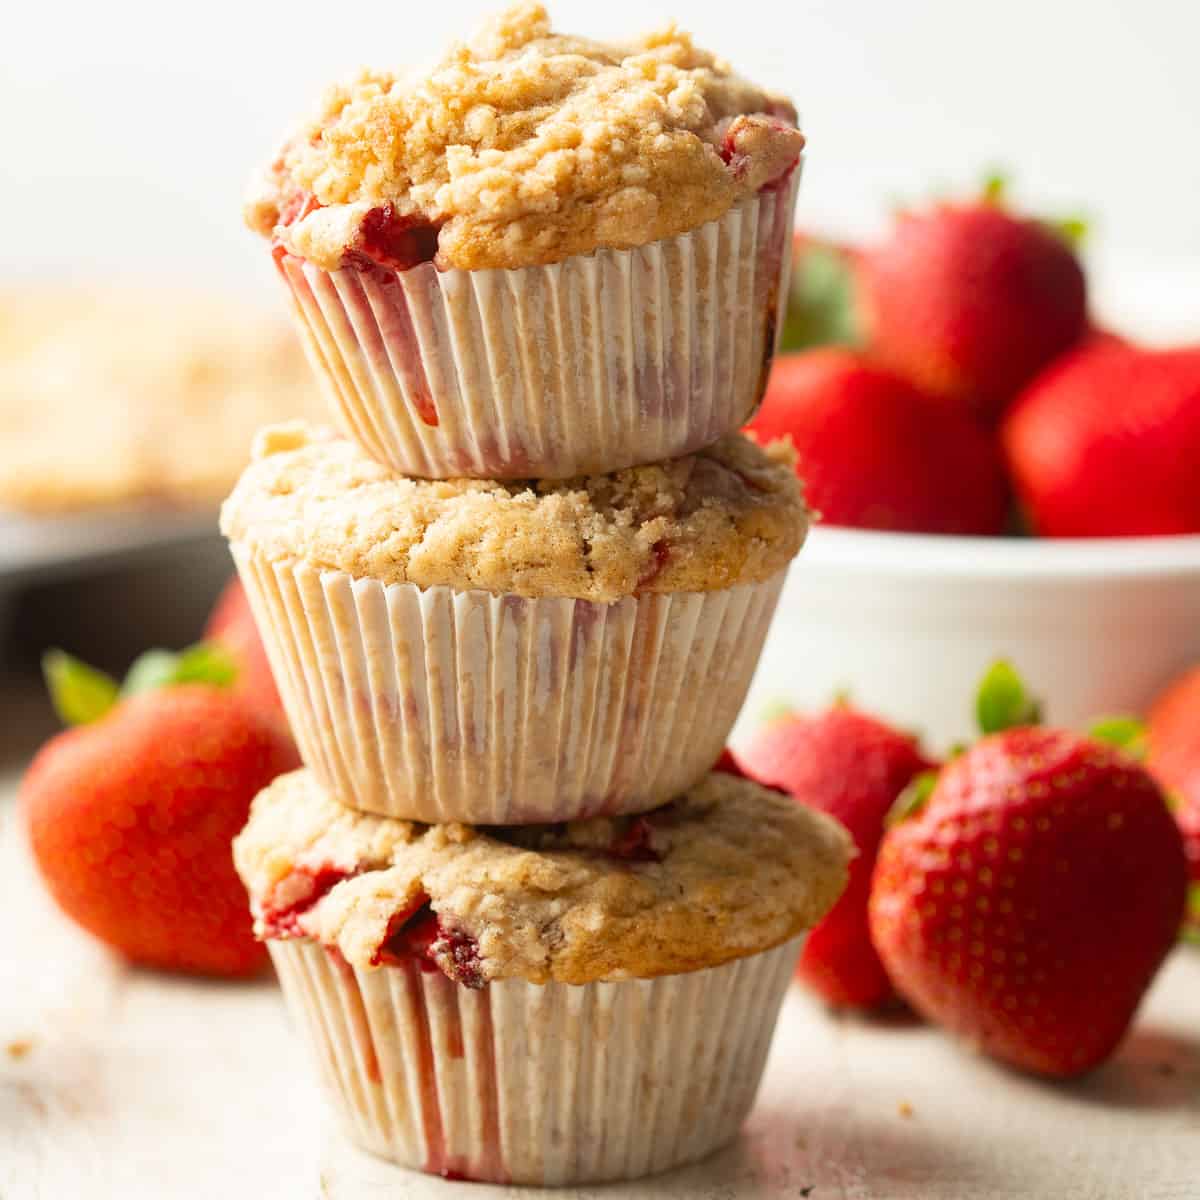 Stack of three Vegan Strawberry Muffins with fresh strawberries in the background.